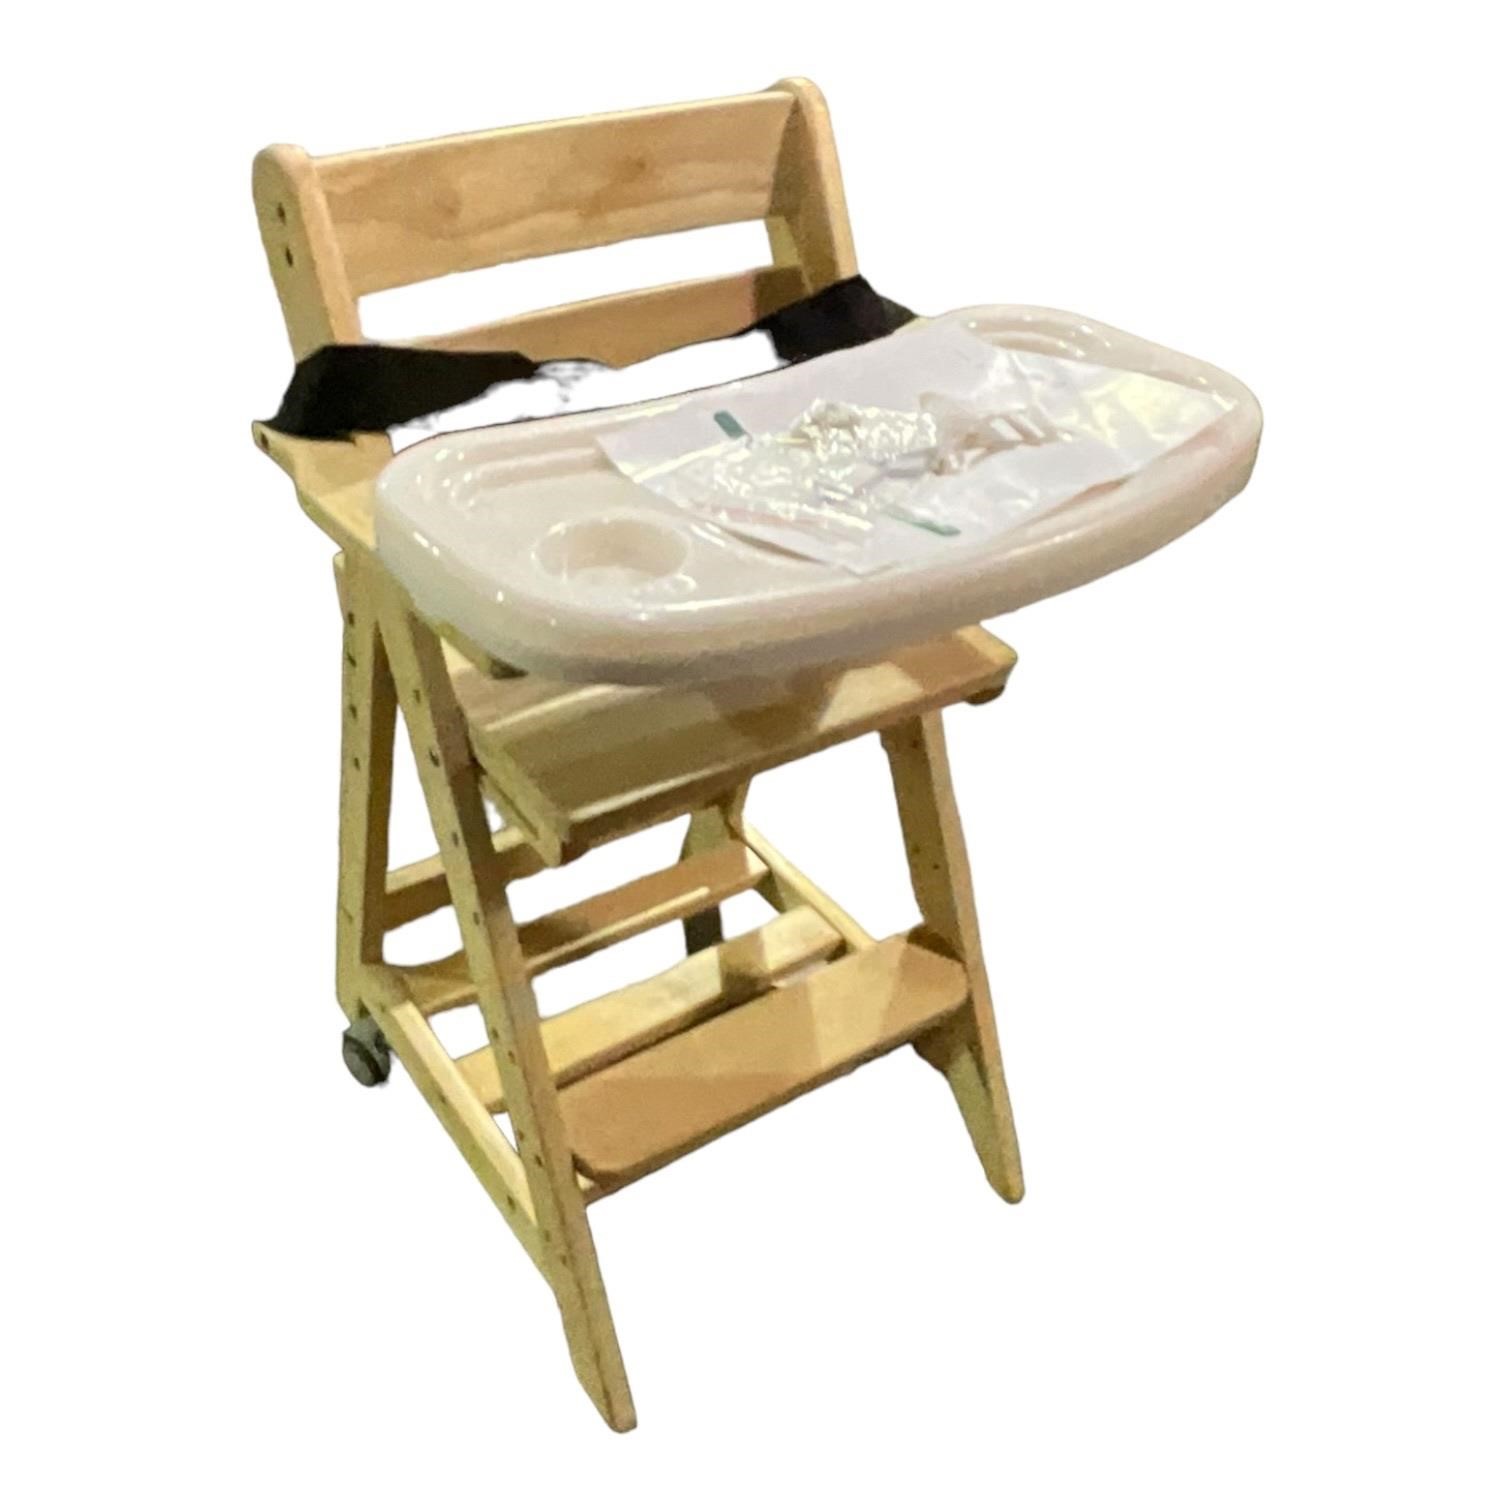 Wooden adjustable high chair - new in box